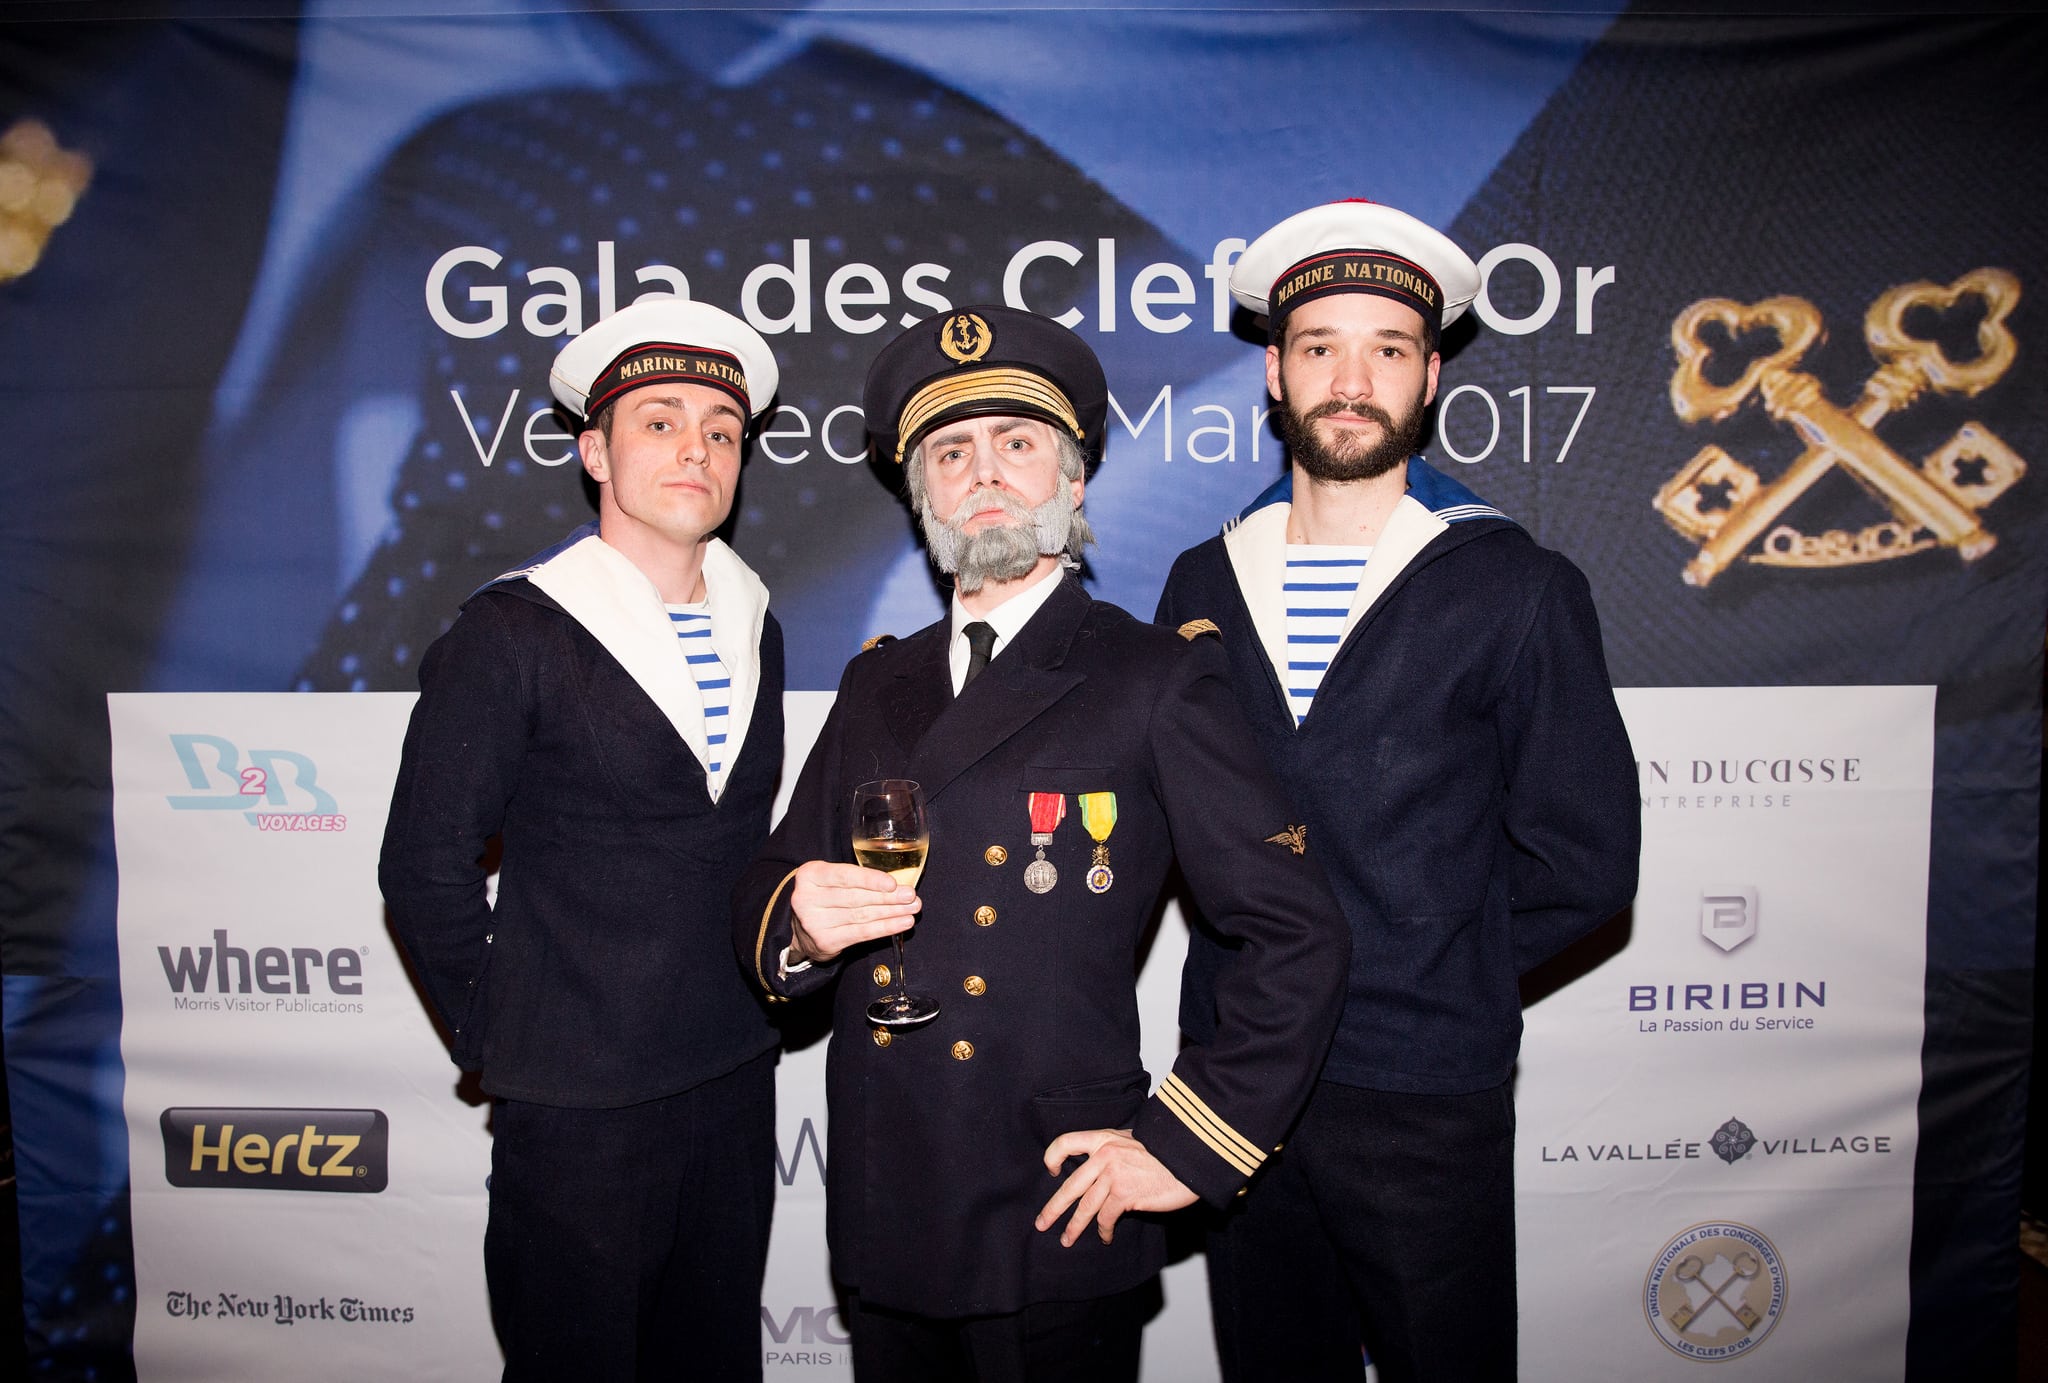 Les Clef’s d’or: A gala on the Titanic